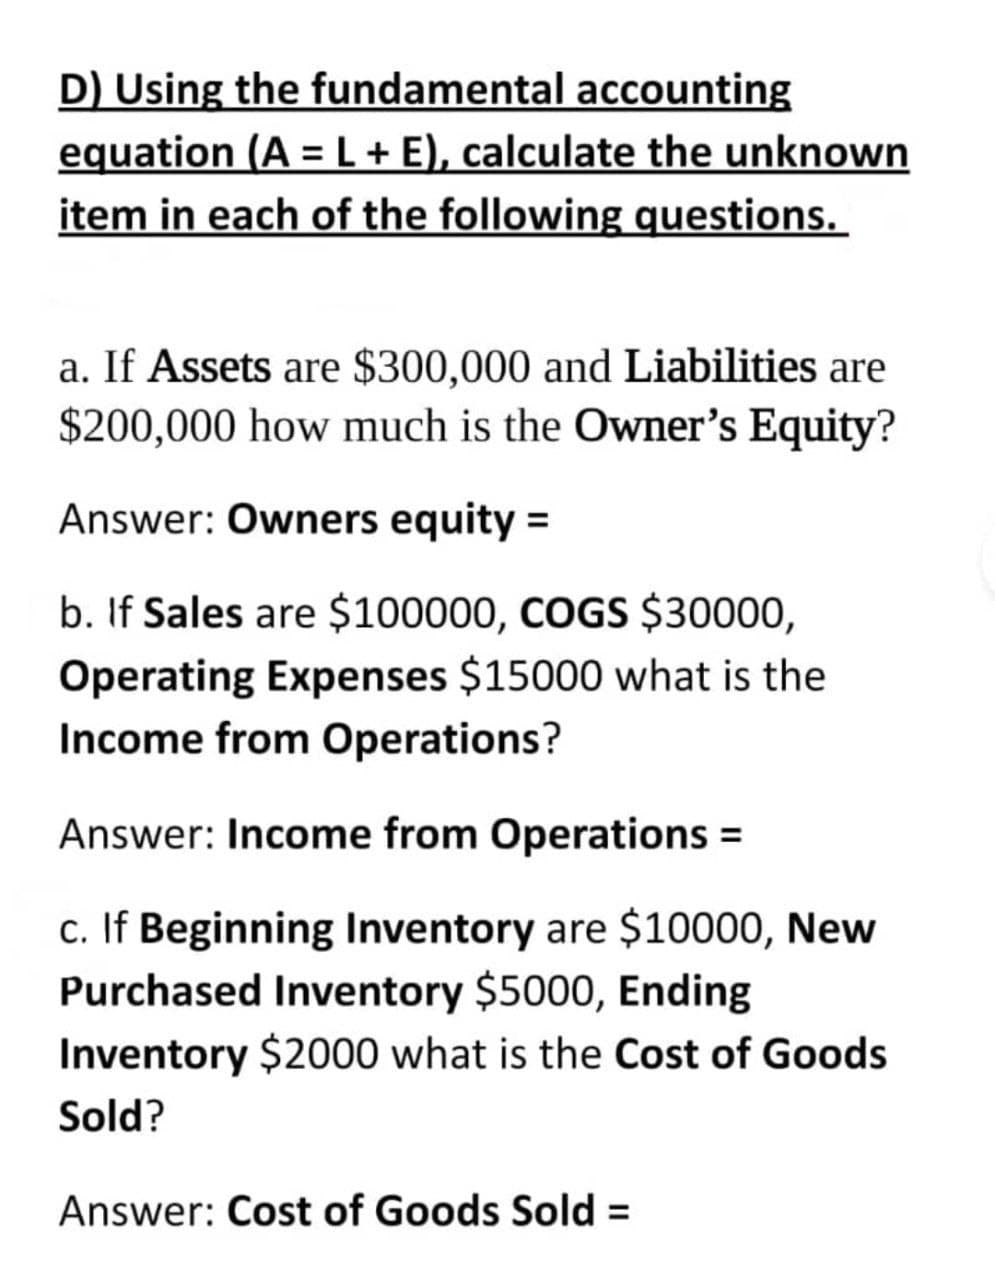 D) Using the fundamental accounting
equation (A = L + E), calculate the unknown
item in each of the following questions.
a. If Assets are $300,000 and Liabilities are
$200,000 how much is the Owner's Equity?
Answer: Owners equity =
b. If Sales are $100000, COGS $30000,
Operating Expenses $15000 what is the
Income from Operations?
Answer: Income from Operations =
c. If Beginning Inventory are $10000, New
Purchased Inventory $5000, Ending
Inventory $2000 what is the Cost of Goods
Sold?
Answer: Cost of Goods Sold =